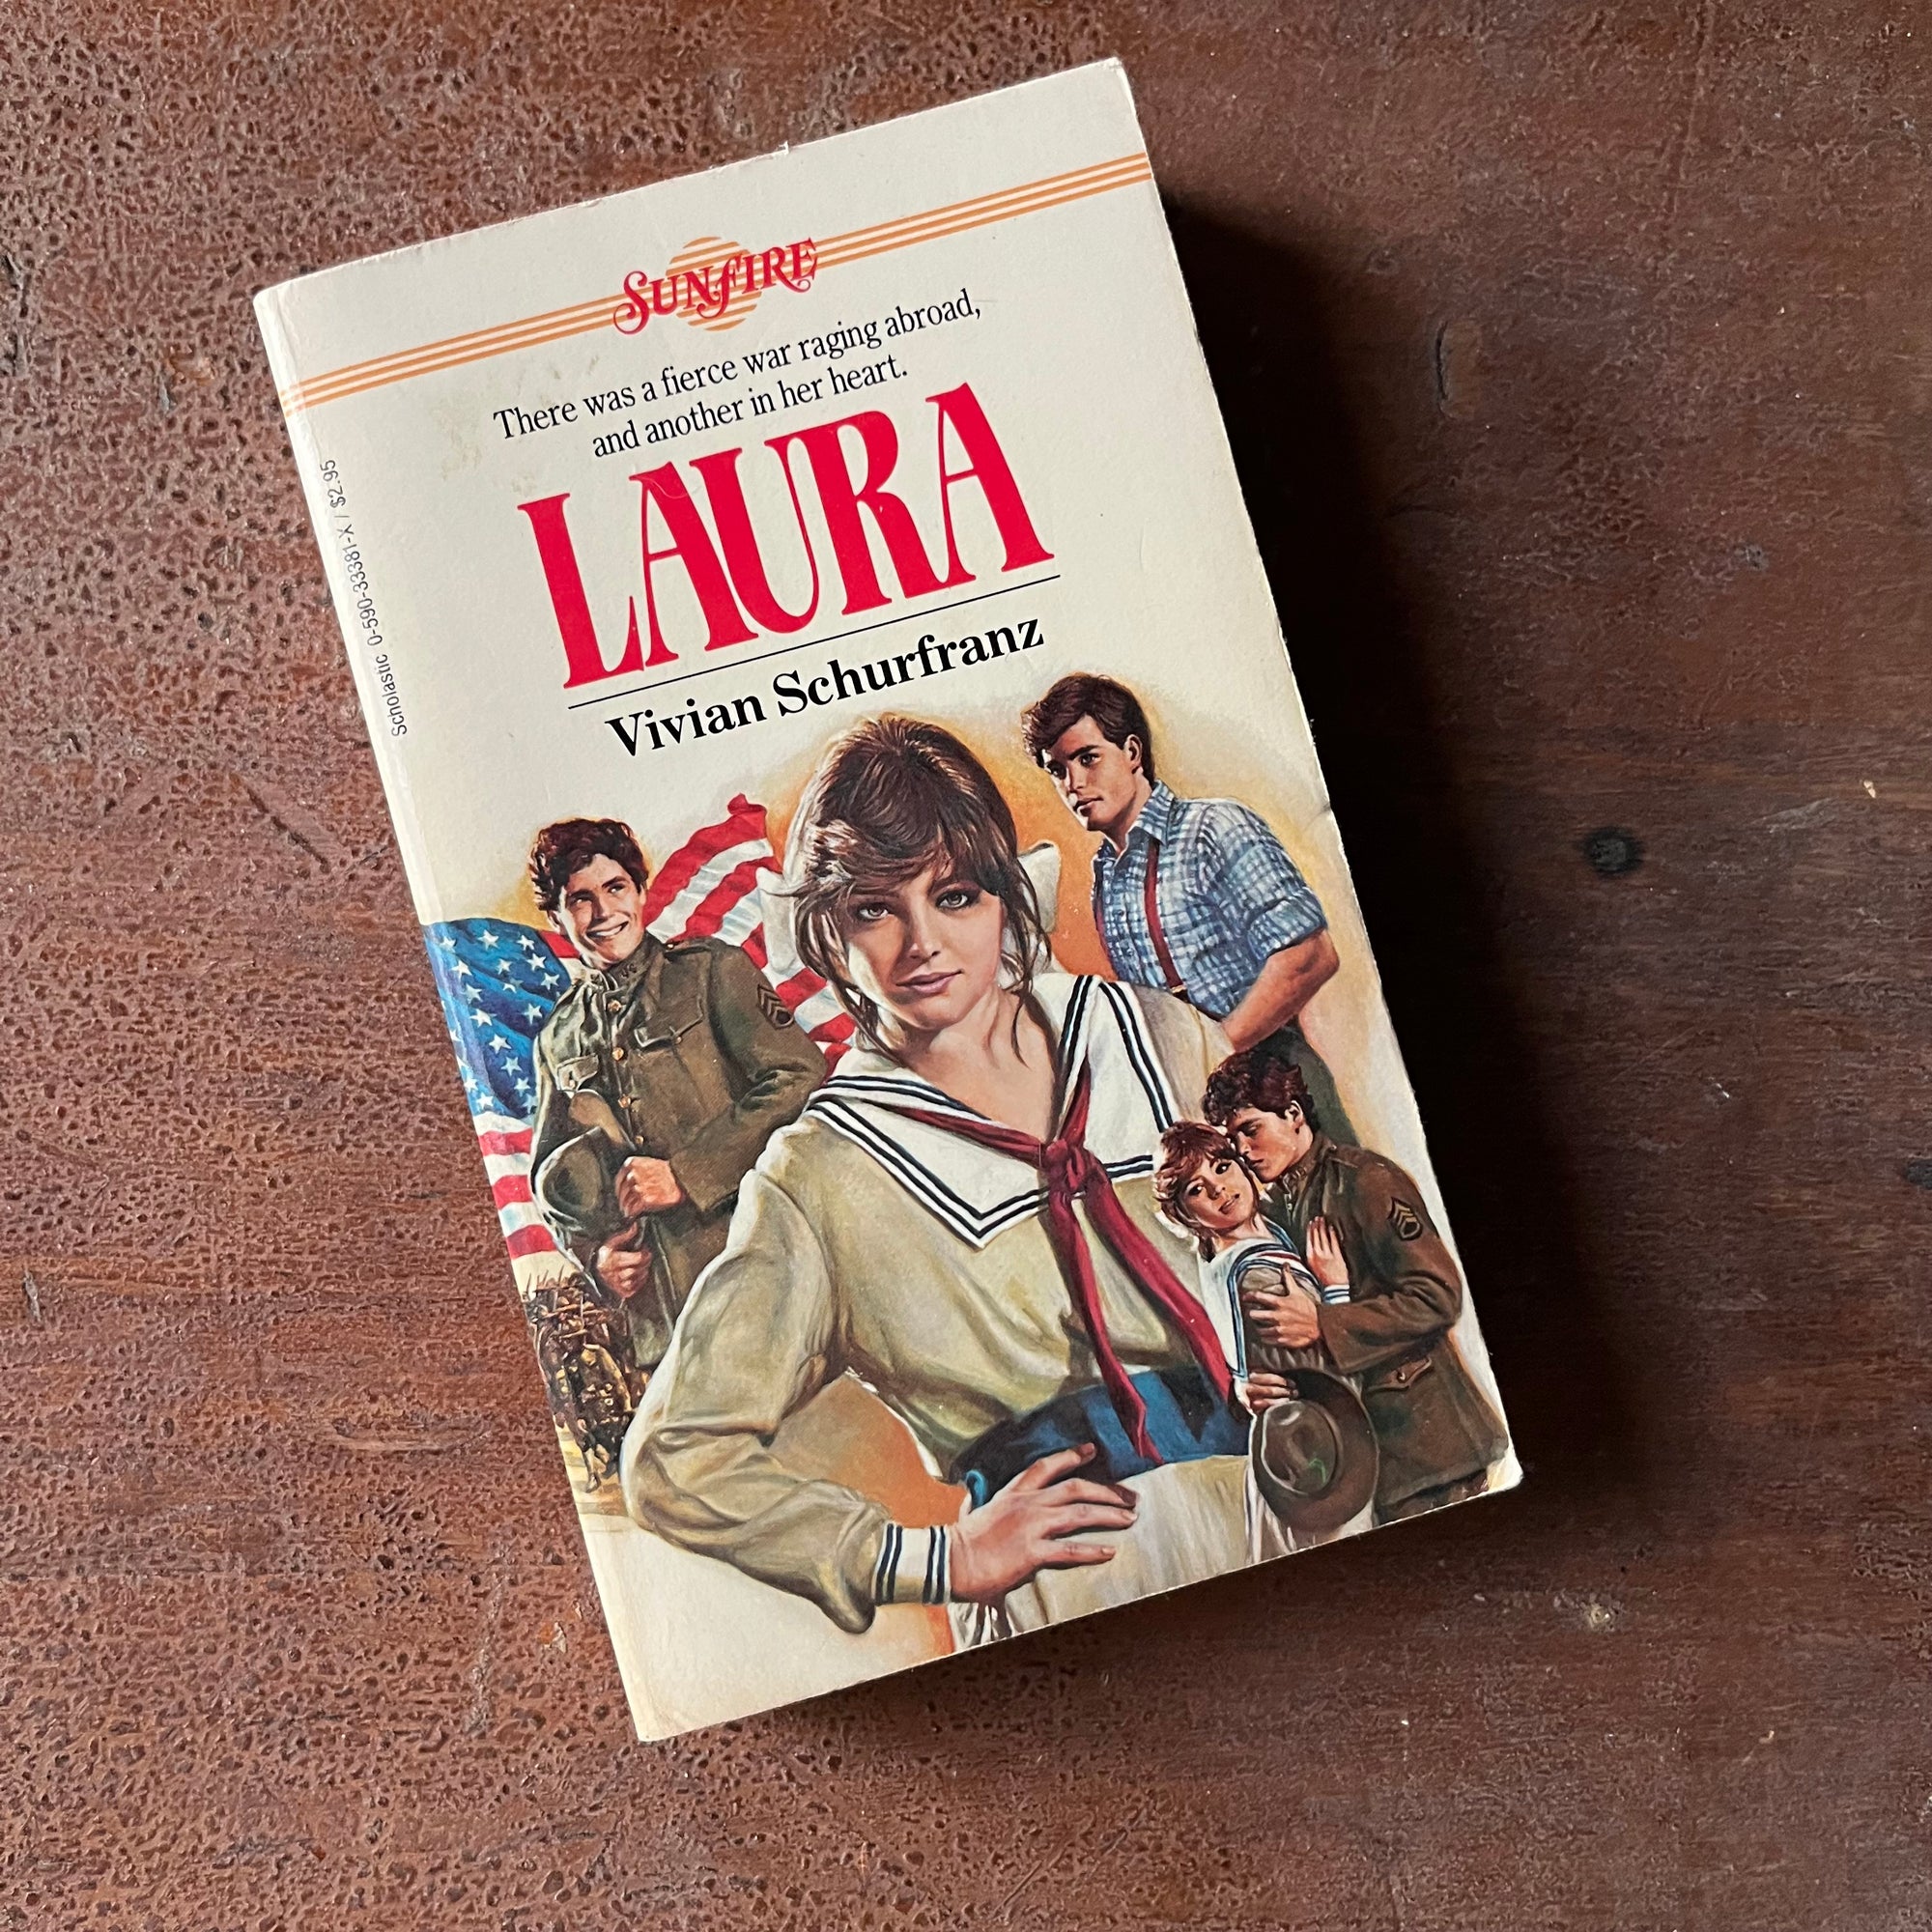 Log Cabin Vintage - vintage young adult book, vintage Scholastic Books Series, Sunfire Romance Series Book - #10 Laura by Vivian Schurfranz - view of the front cover